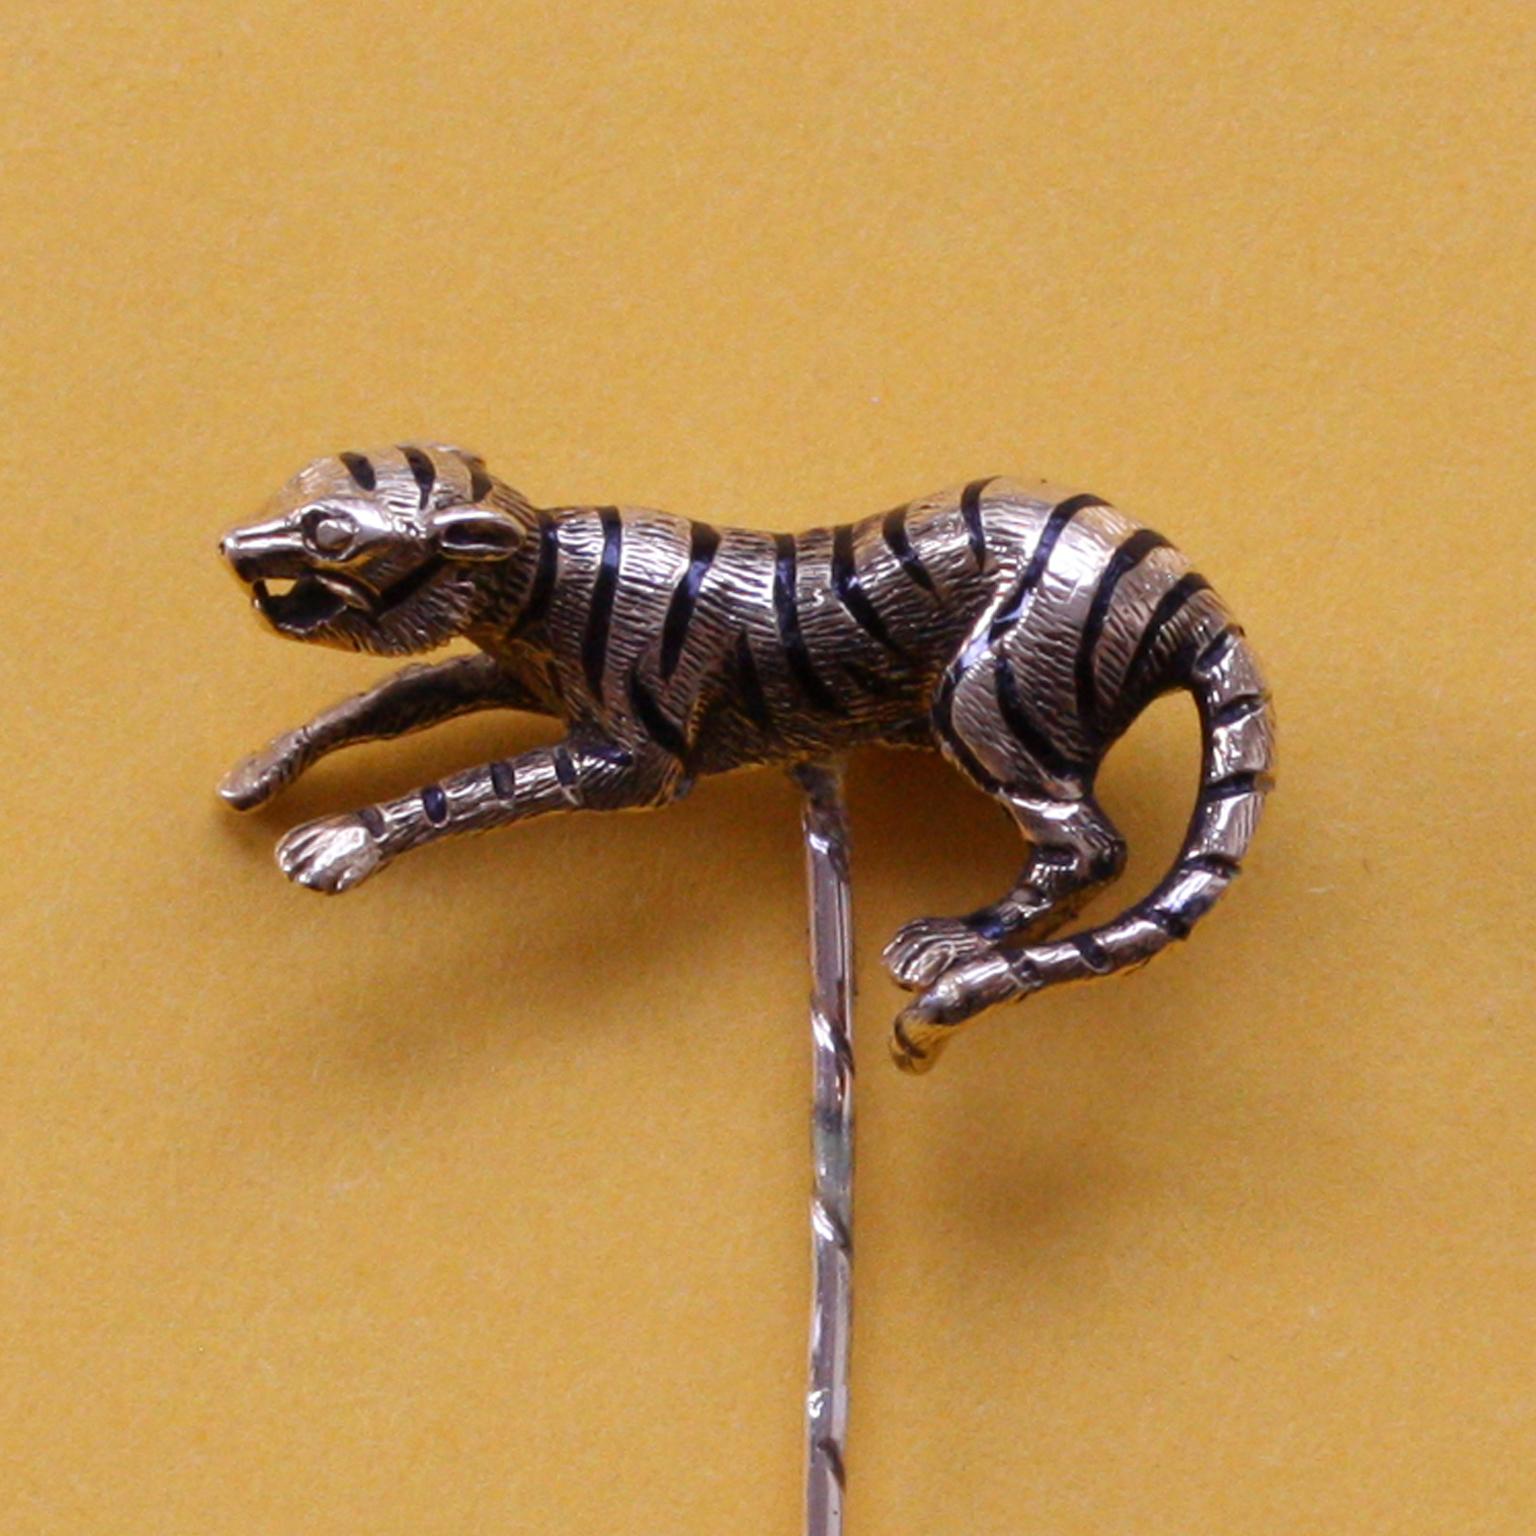 An 18 carat gold stickpin in the shape of a tiger with engraved hair and black enamel stripes, 19th century.

weight: 6.50 gram
dimensions tiger: 2.4 x 1.5 cm
length including pin: 5.9 cm